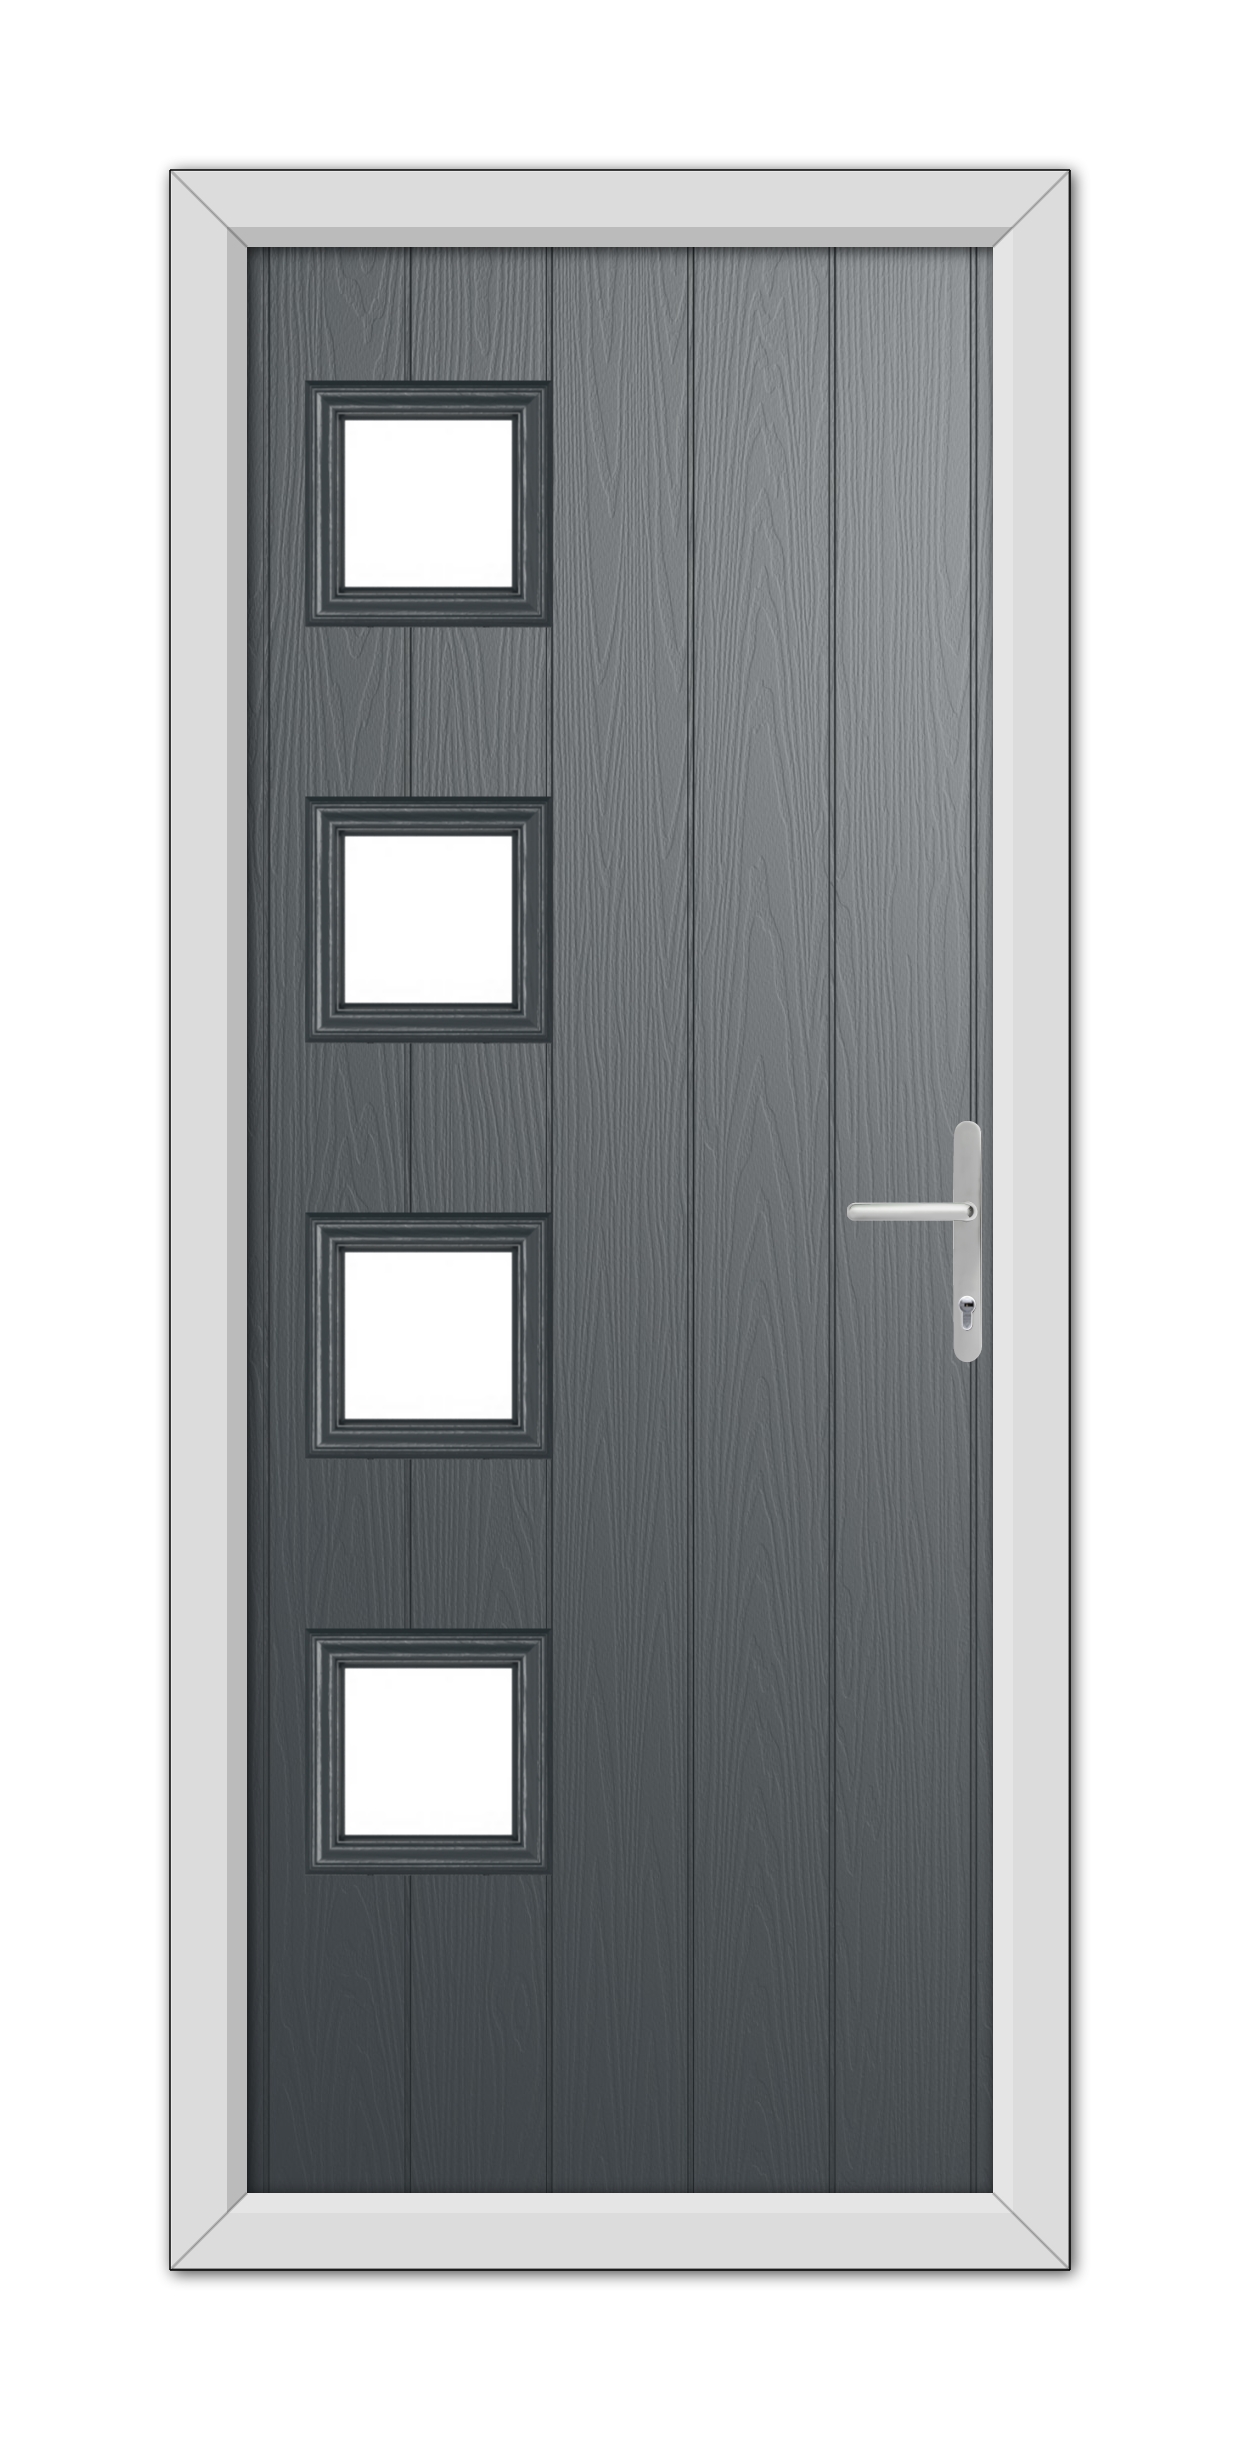 A modern Anthracite Grey Sussex Composite Door 48mm Timber Core featuring a vertical alignment of five rectangular glass panels and a metallic handle, set within a white frame.